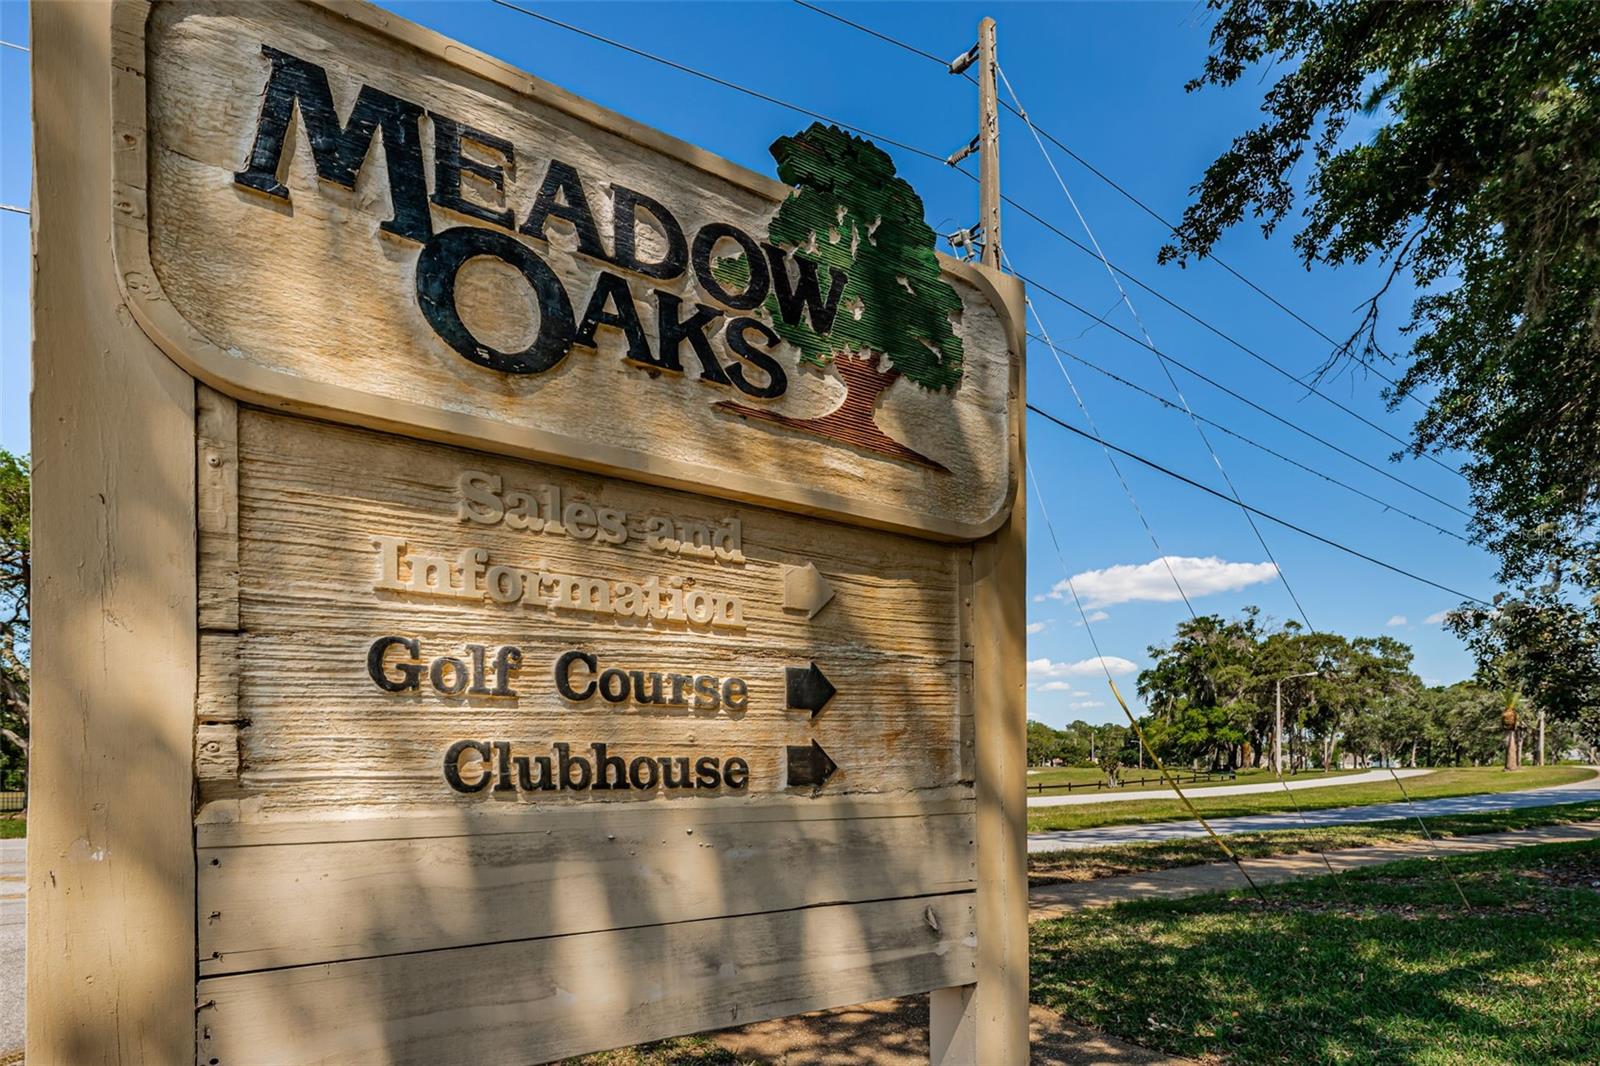 Meadow Oaks is a golf and tennis community